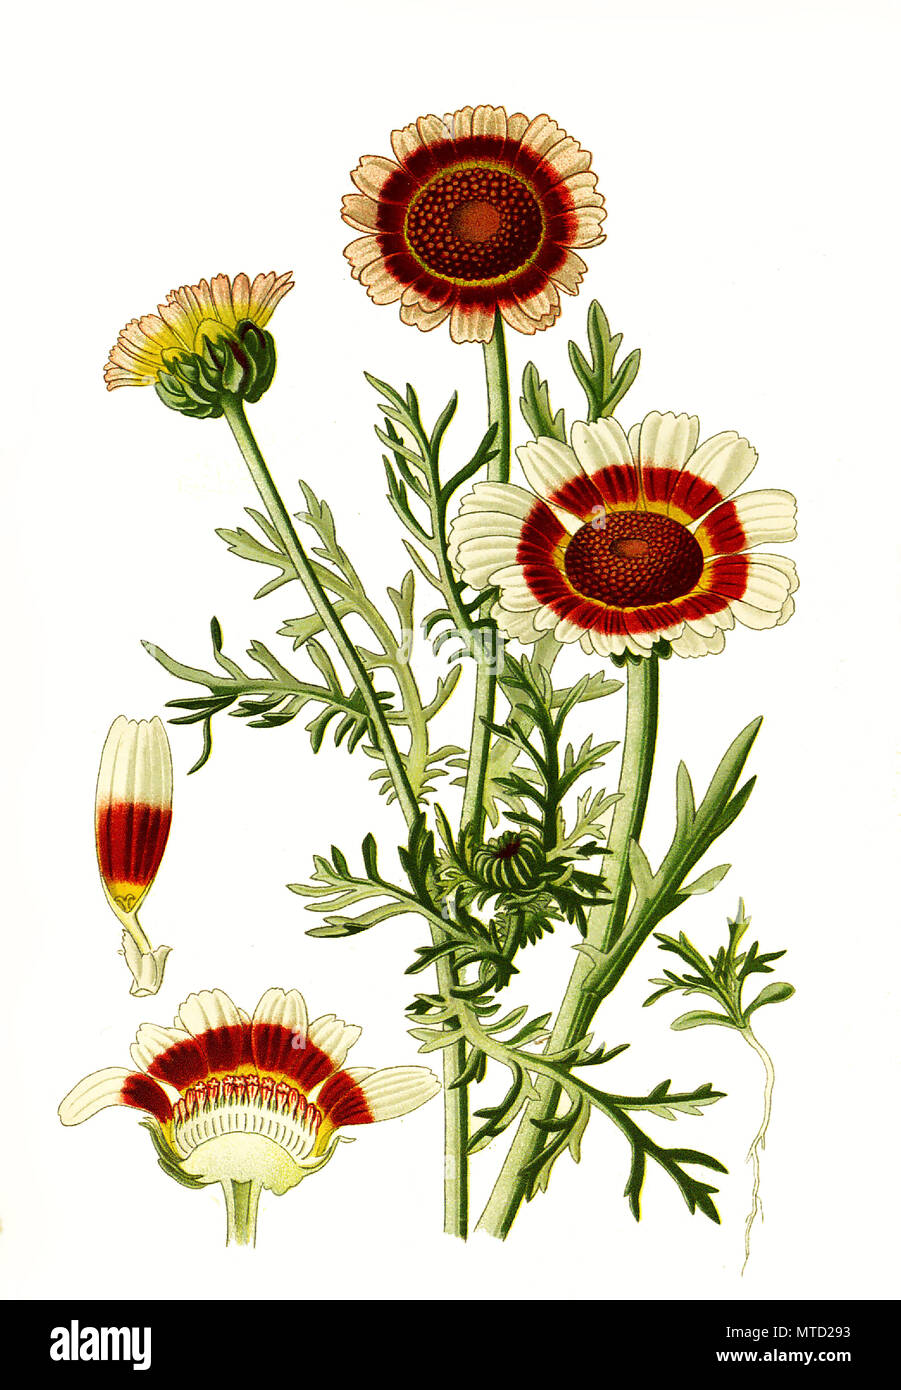 Ismelia carinata, the tricolour chrysanthemum, tricolor daisy, annual chrysanthemum. Chrysantheme, digital improved reproduction from a print of the 19th century Stock Photo